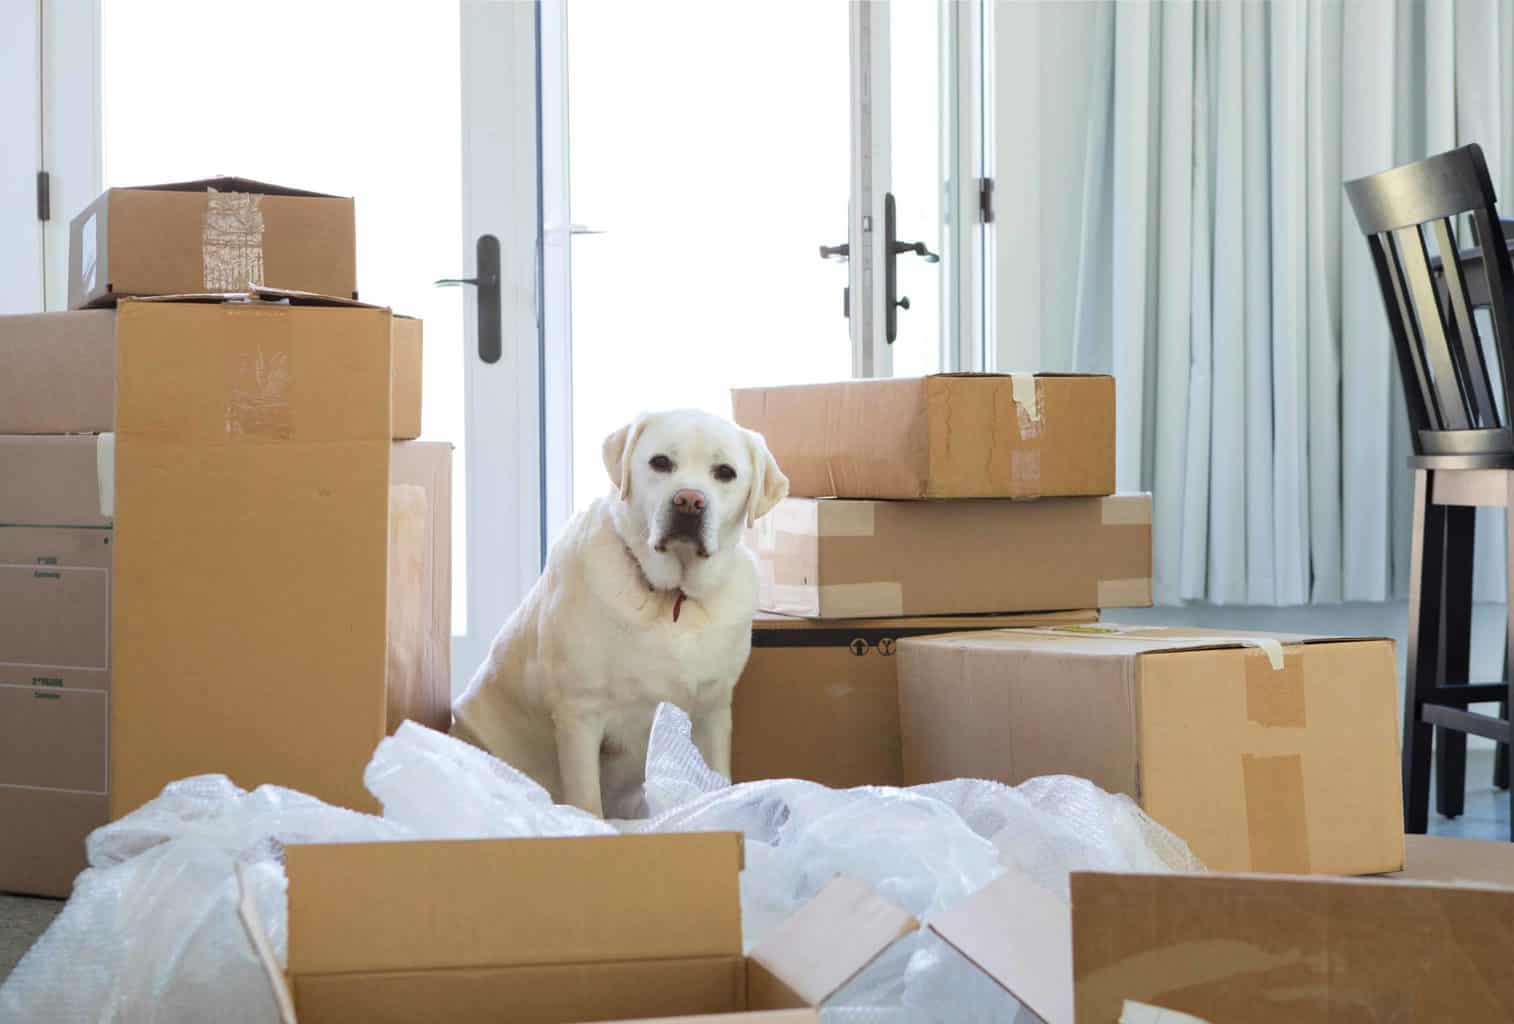 Worried-looking Labrador sits among moving boxes. Moving with dogs can be stressful.